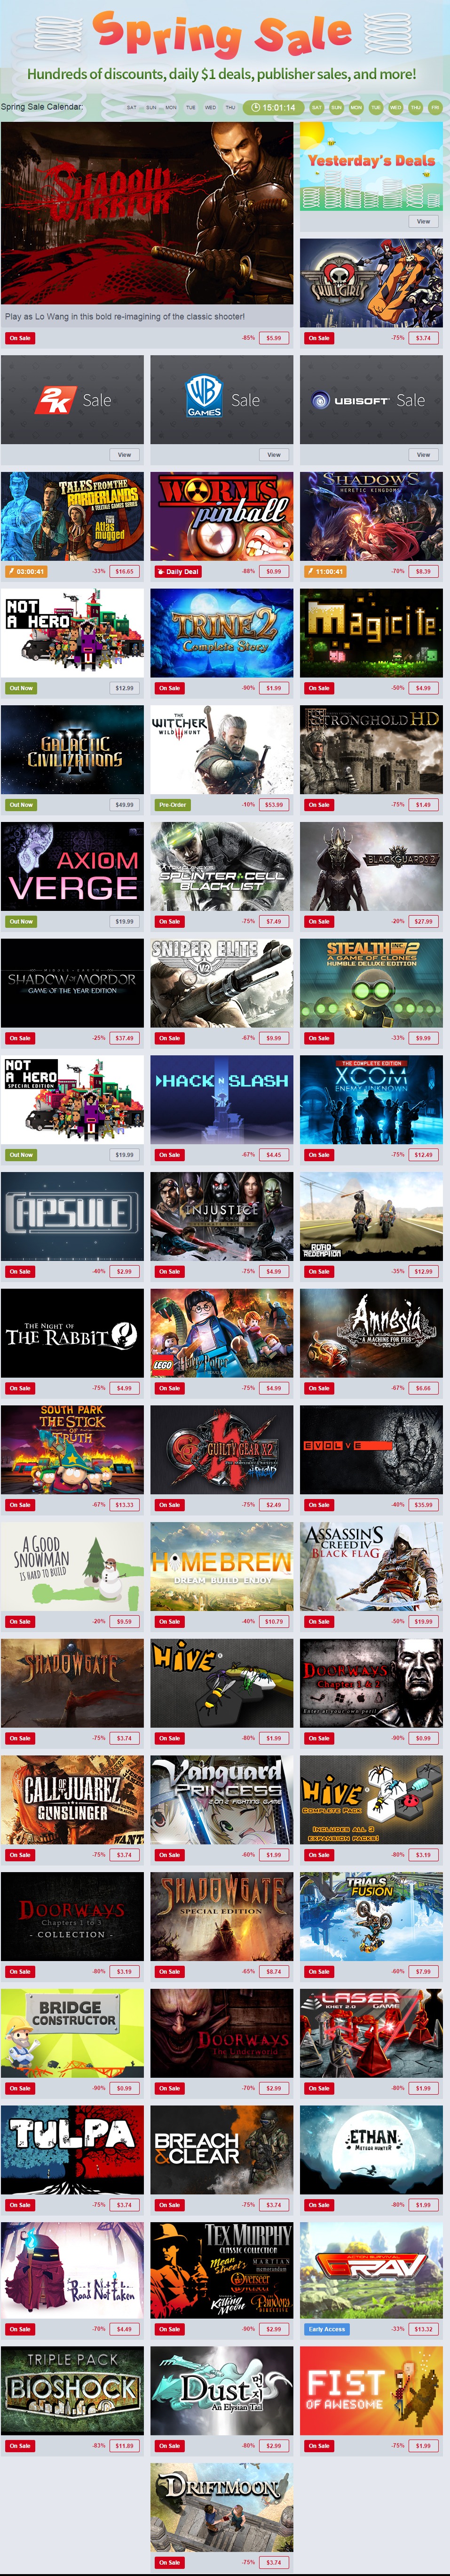 The Humble Store  Great games. Fantastic prices. Support charity..jpeg